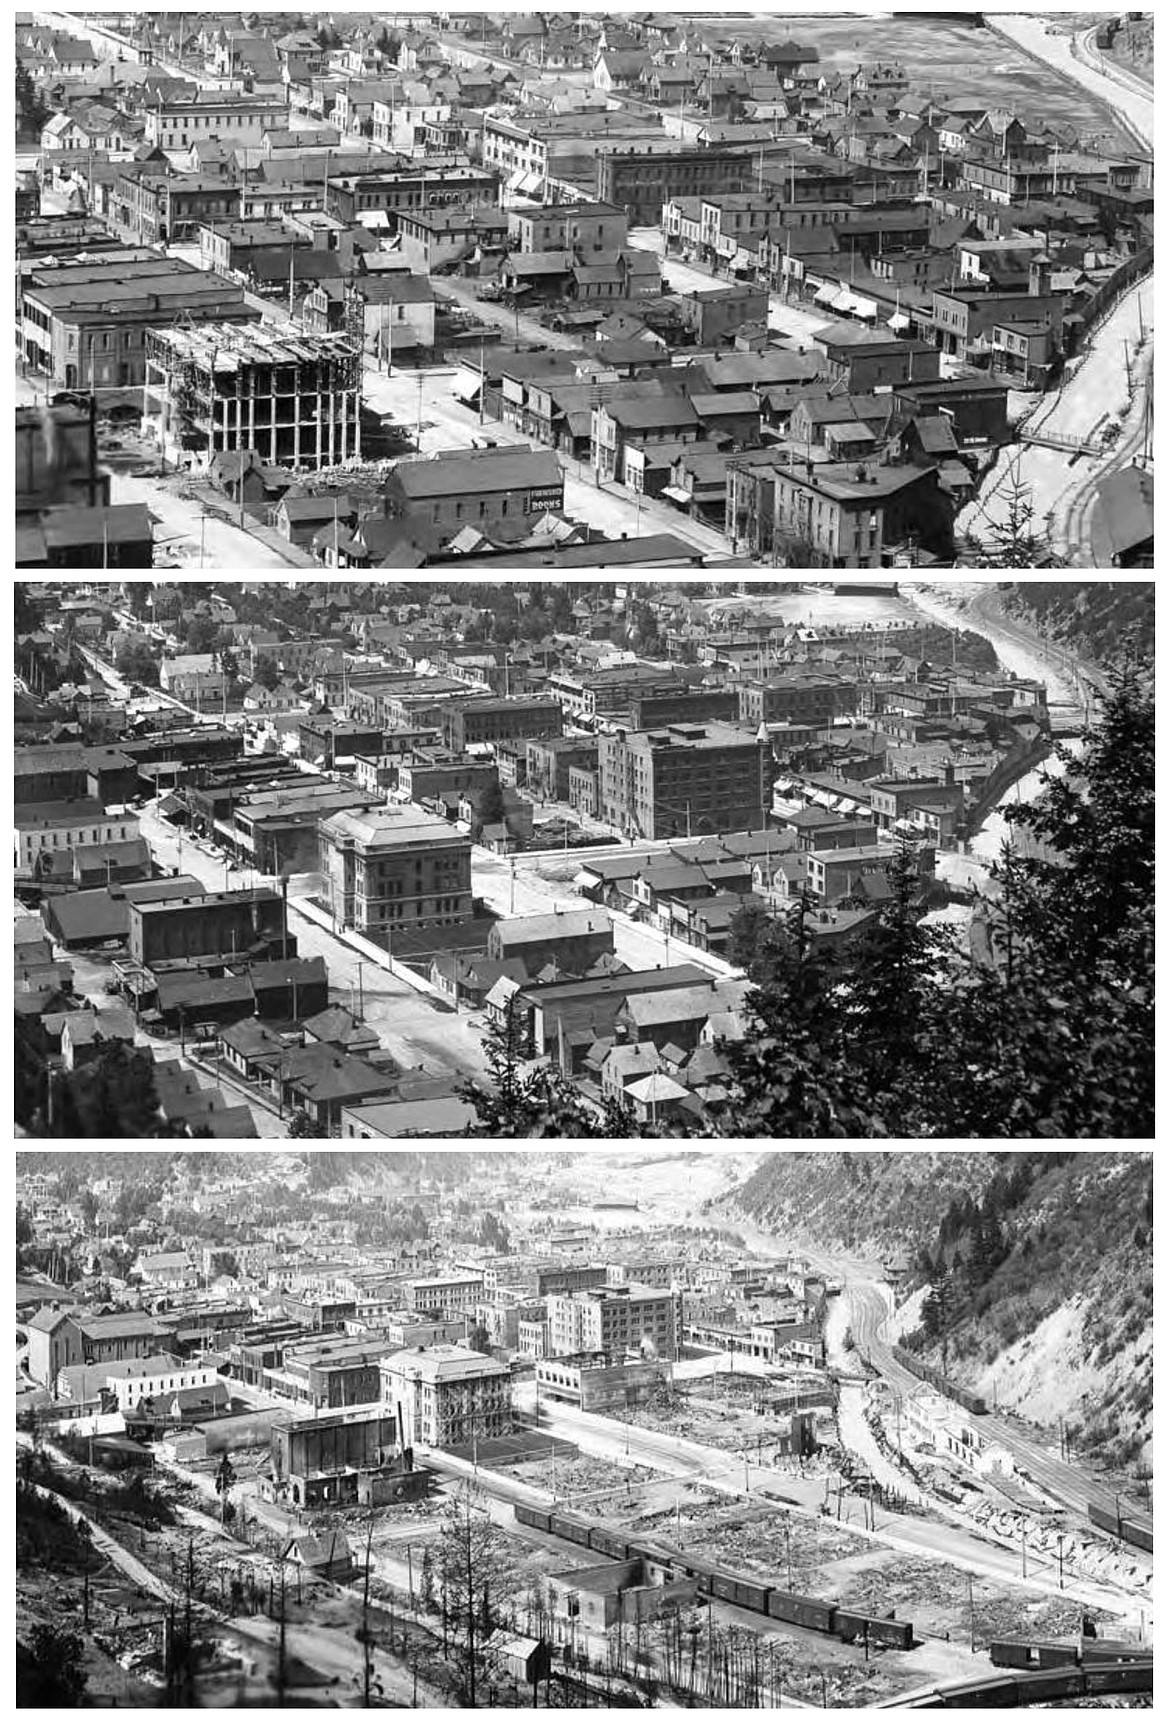 These photos (dated from the top 1906, 1909 and 1910) show the progression of the downtown Wallace area, including the construction of the courthouse in 1906 when the lot formerly occupied by the Samuels was nothing more than a few shacks. Then following the completion of it and the courthouse, the Samuels was an imposing structure. In 1910, when the Big Burn happened, the courthouse, the Samuels, and the recently completed Worstell building (across from the courthouse) acted as a fire break that prevented the fire from turning west into more of the downtown area.